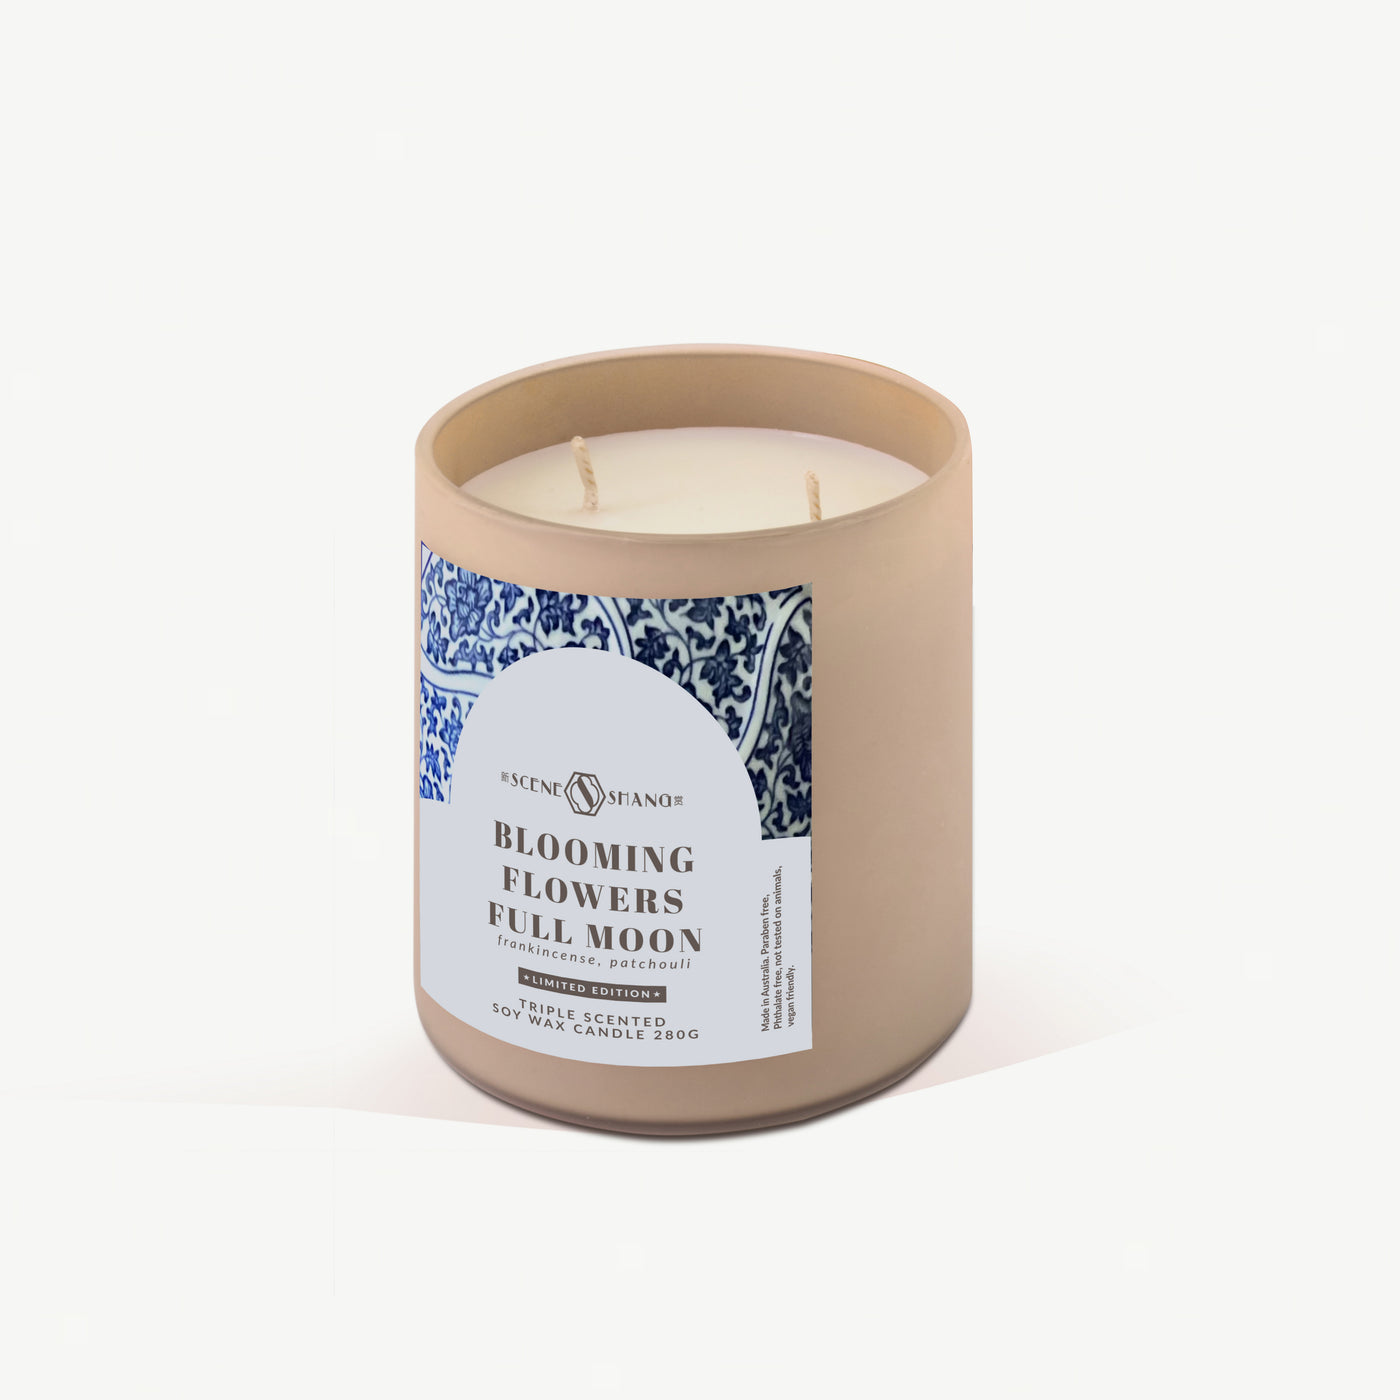 [LIMITED EDITION] BLOOMING FLOWERS FULL MOON Triple Scented Soy Wax Candle (Frankincense, Patchouli)